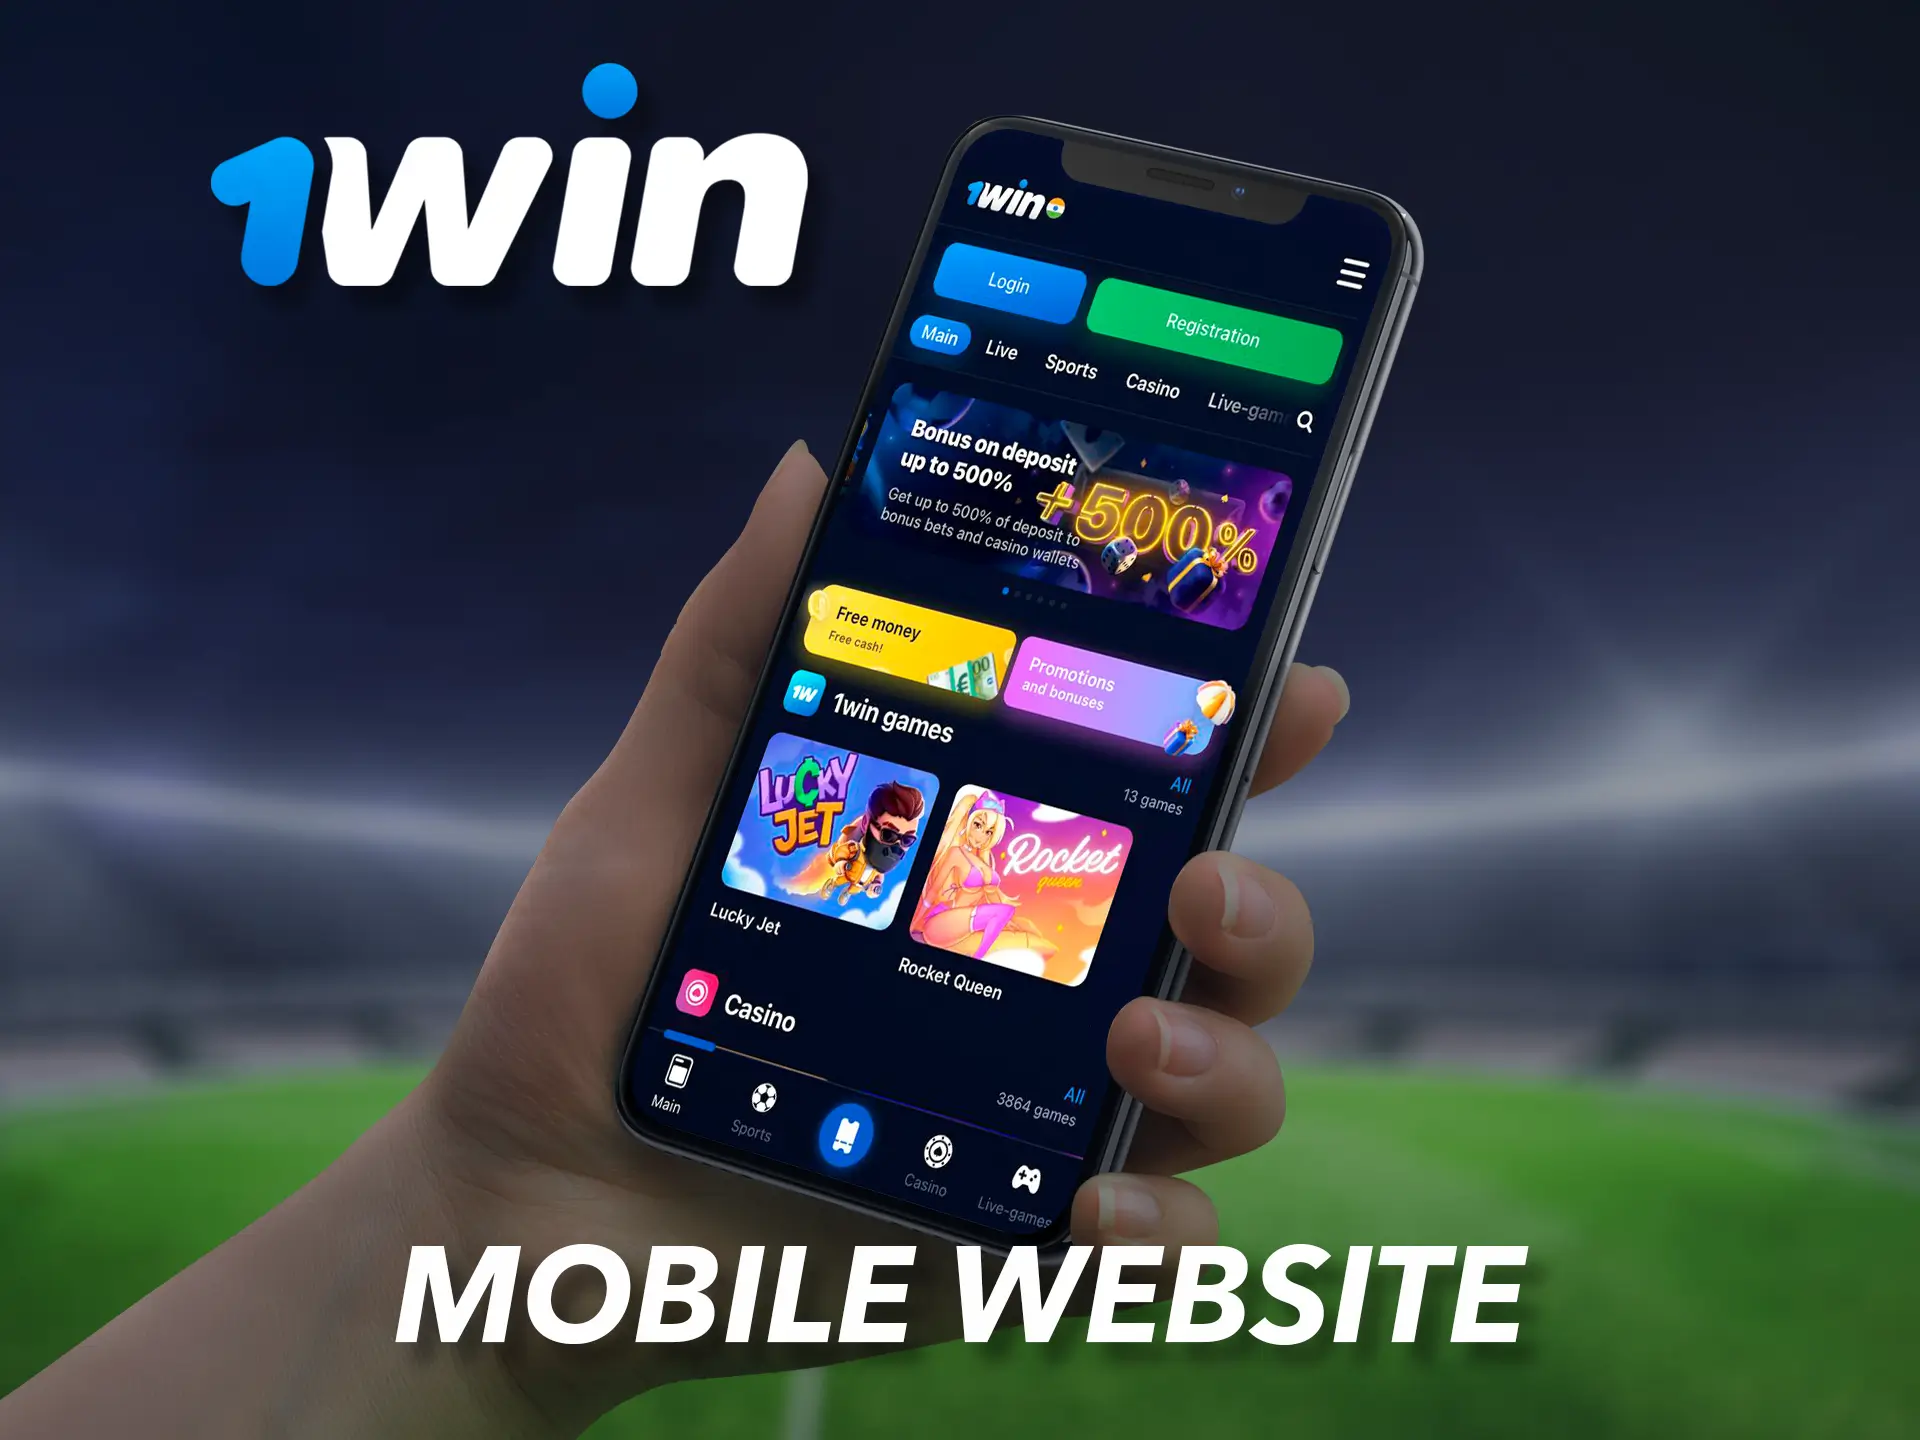 1Win's mobile site adapts perfectly to any browser.